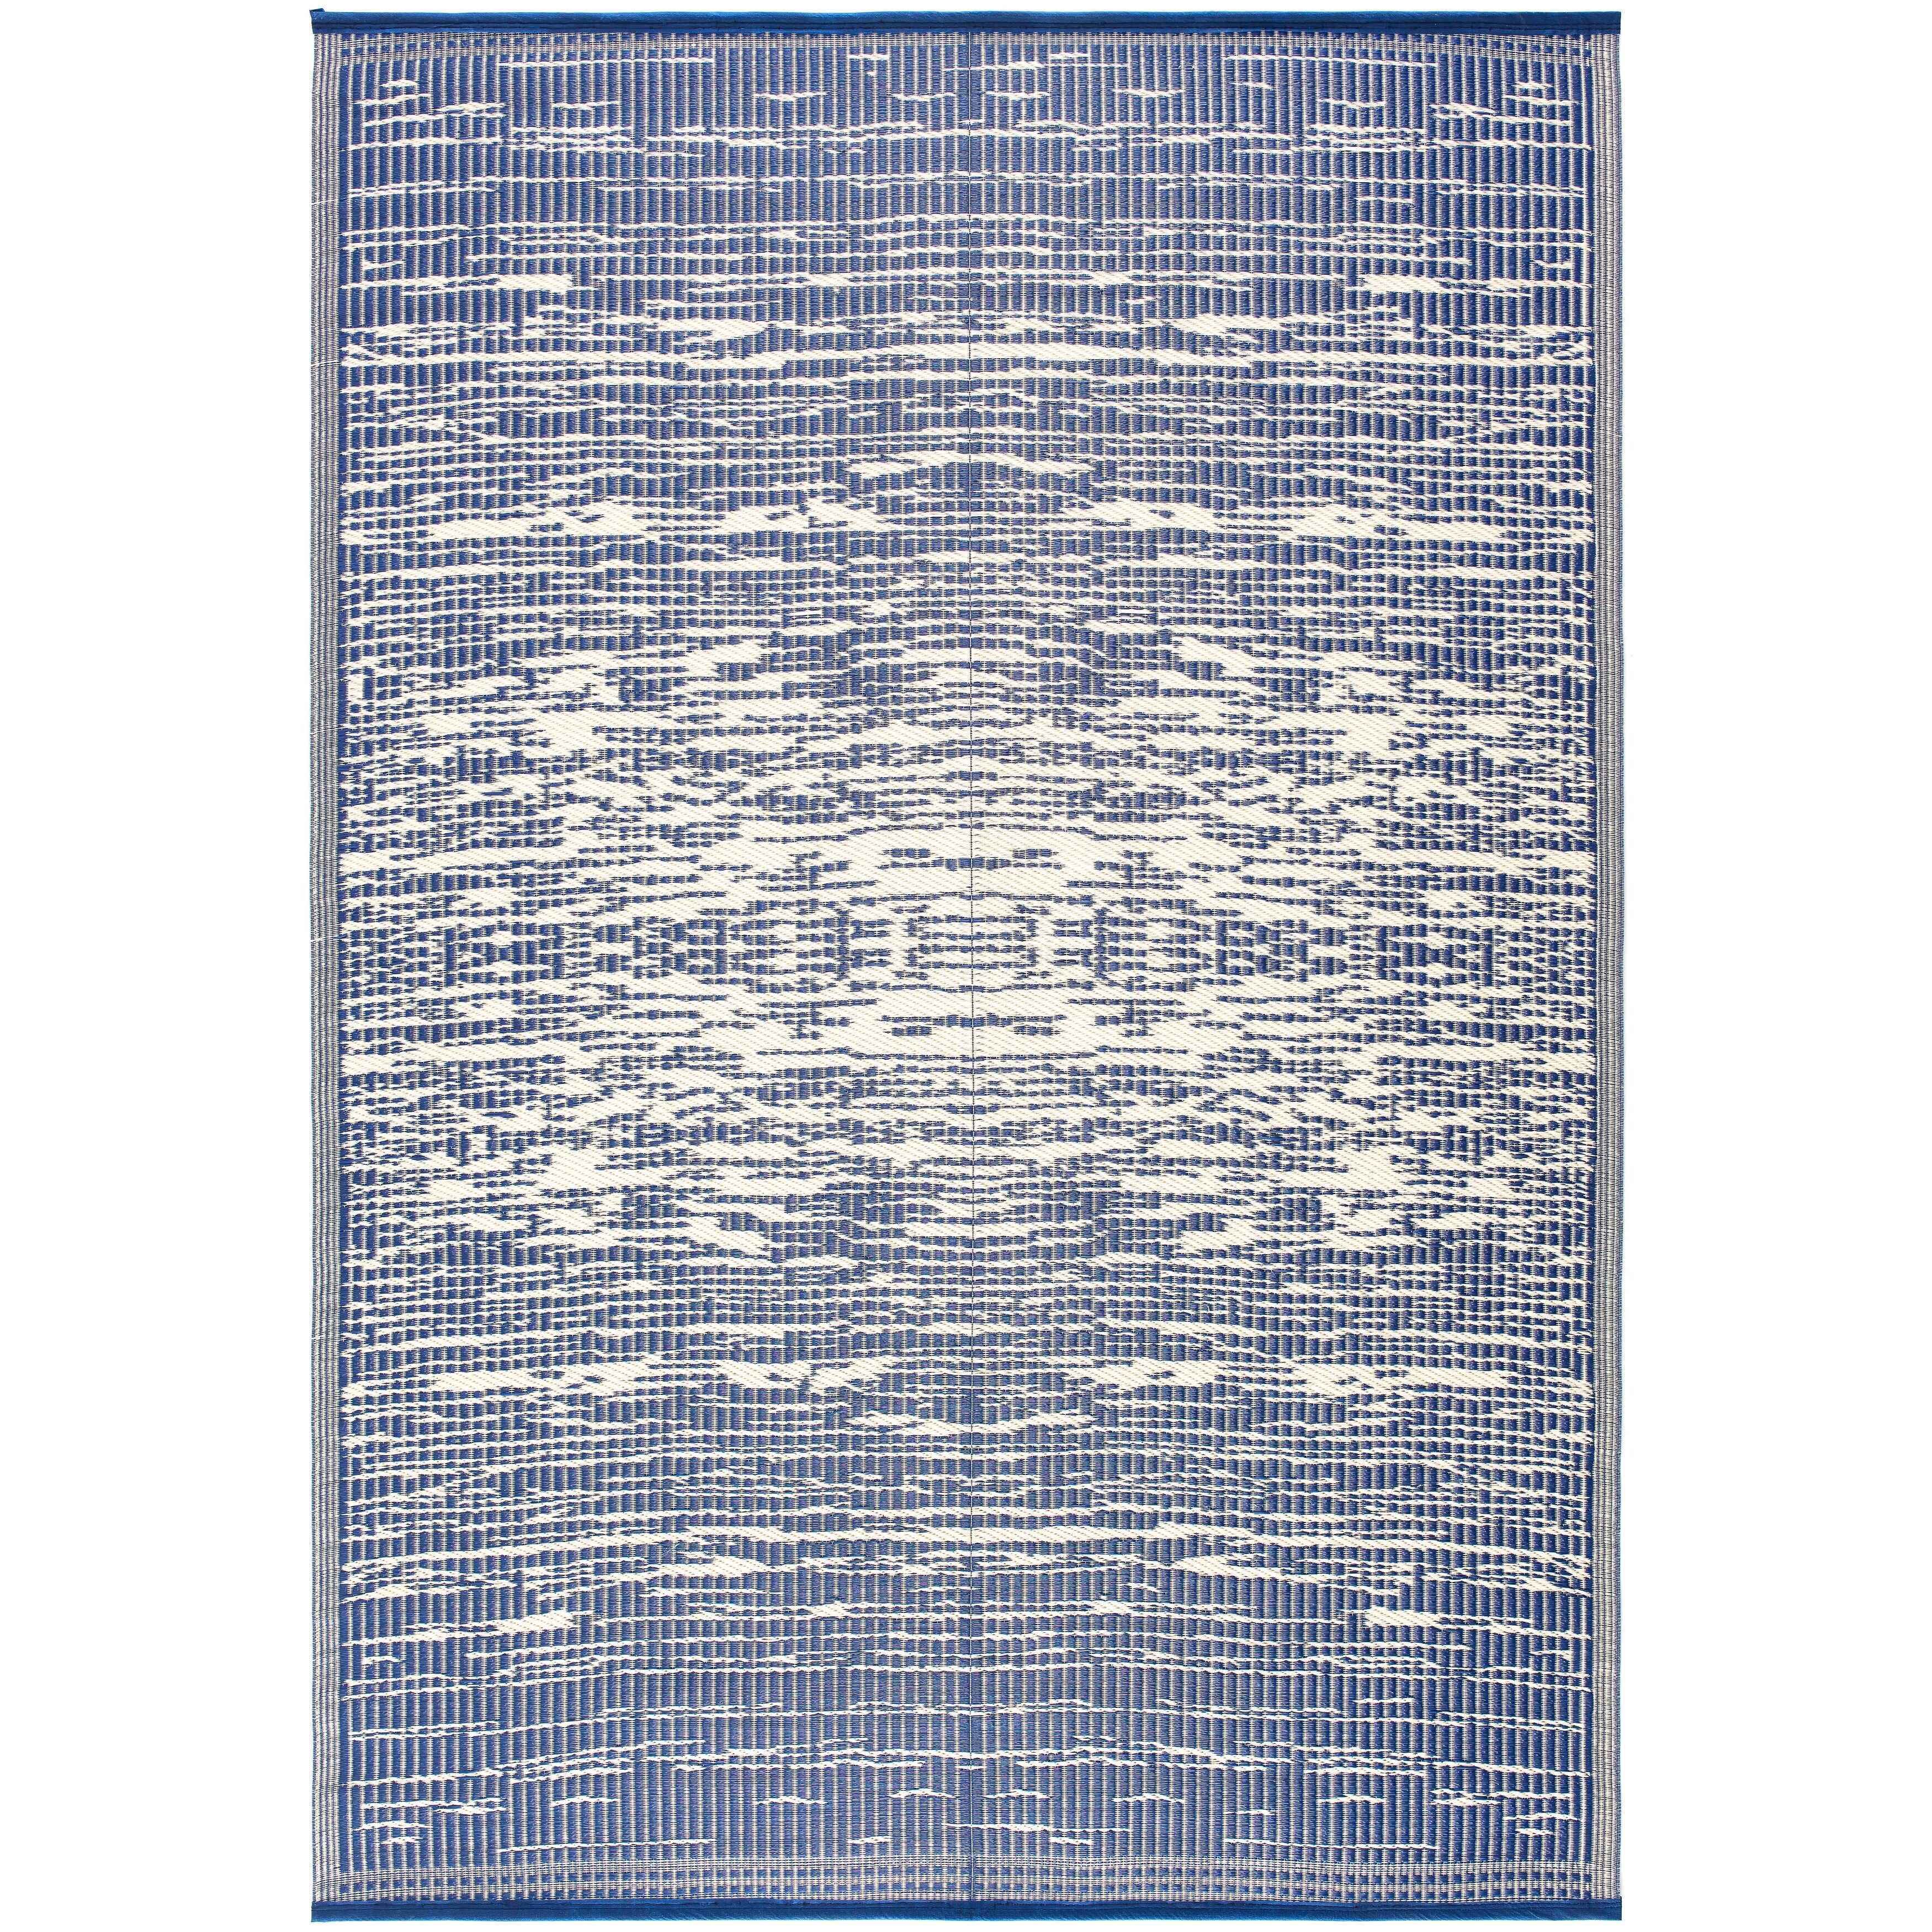 Outsunny Reversible Outdoor RV Rug, Patio Floor Mat, Plastic Straw Rug for  Backyard, Deck, Picnic, Beach, Camping - Bed Bath & Beyond - 35400104